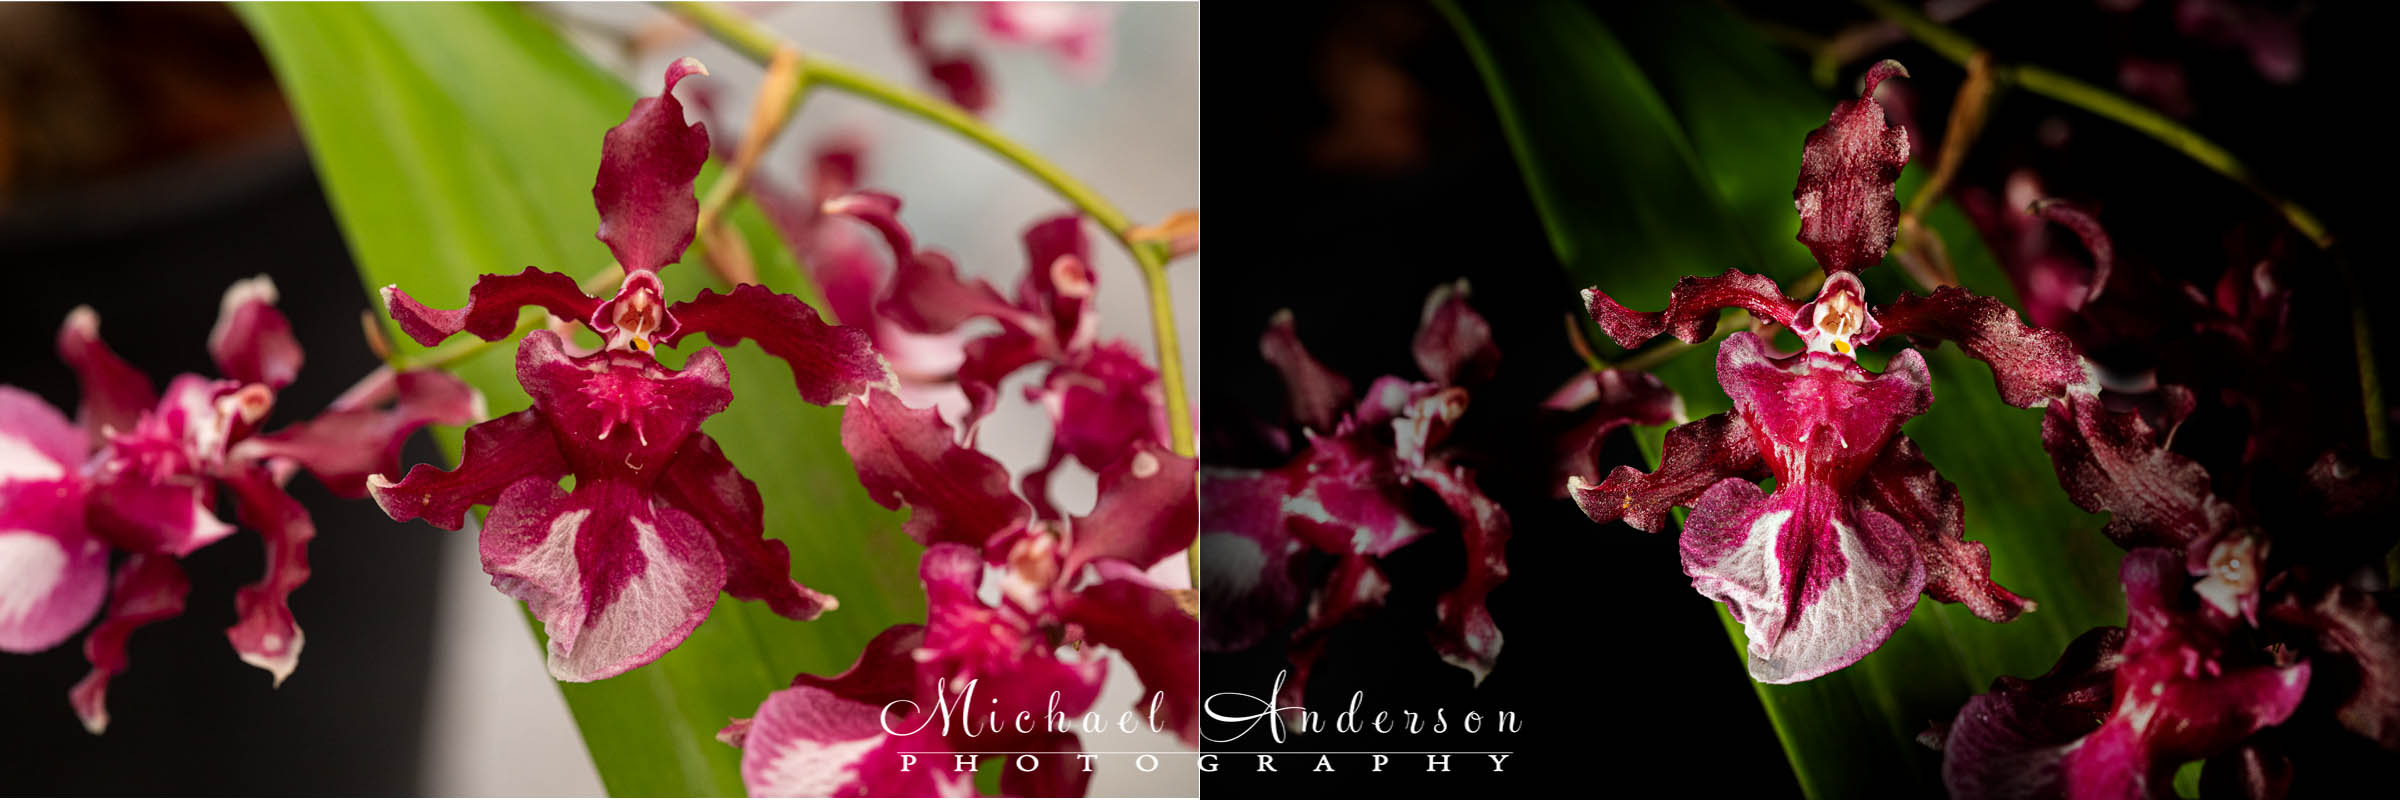 The before and after light painting photos of the tiny Oncidium Sharry Baby Orchid.